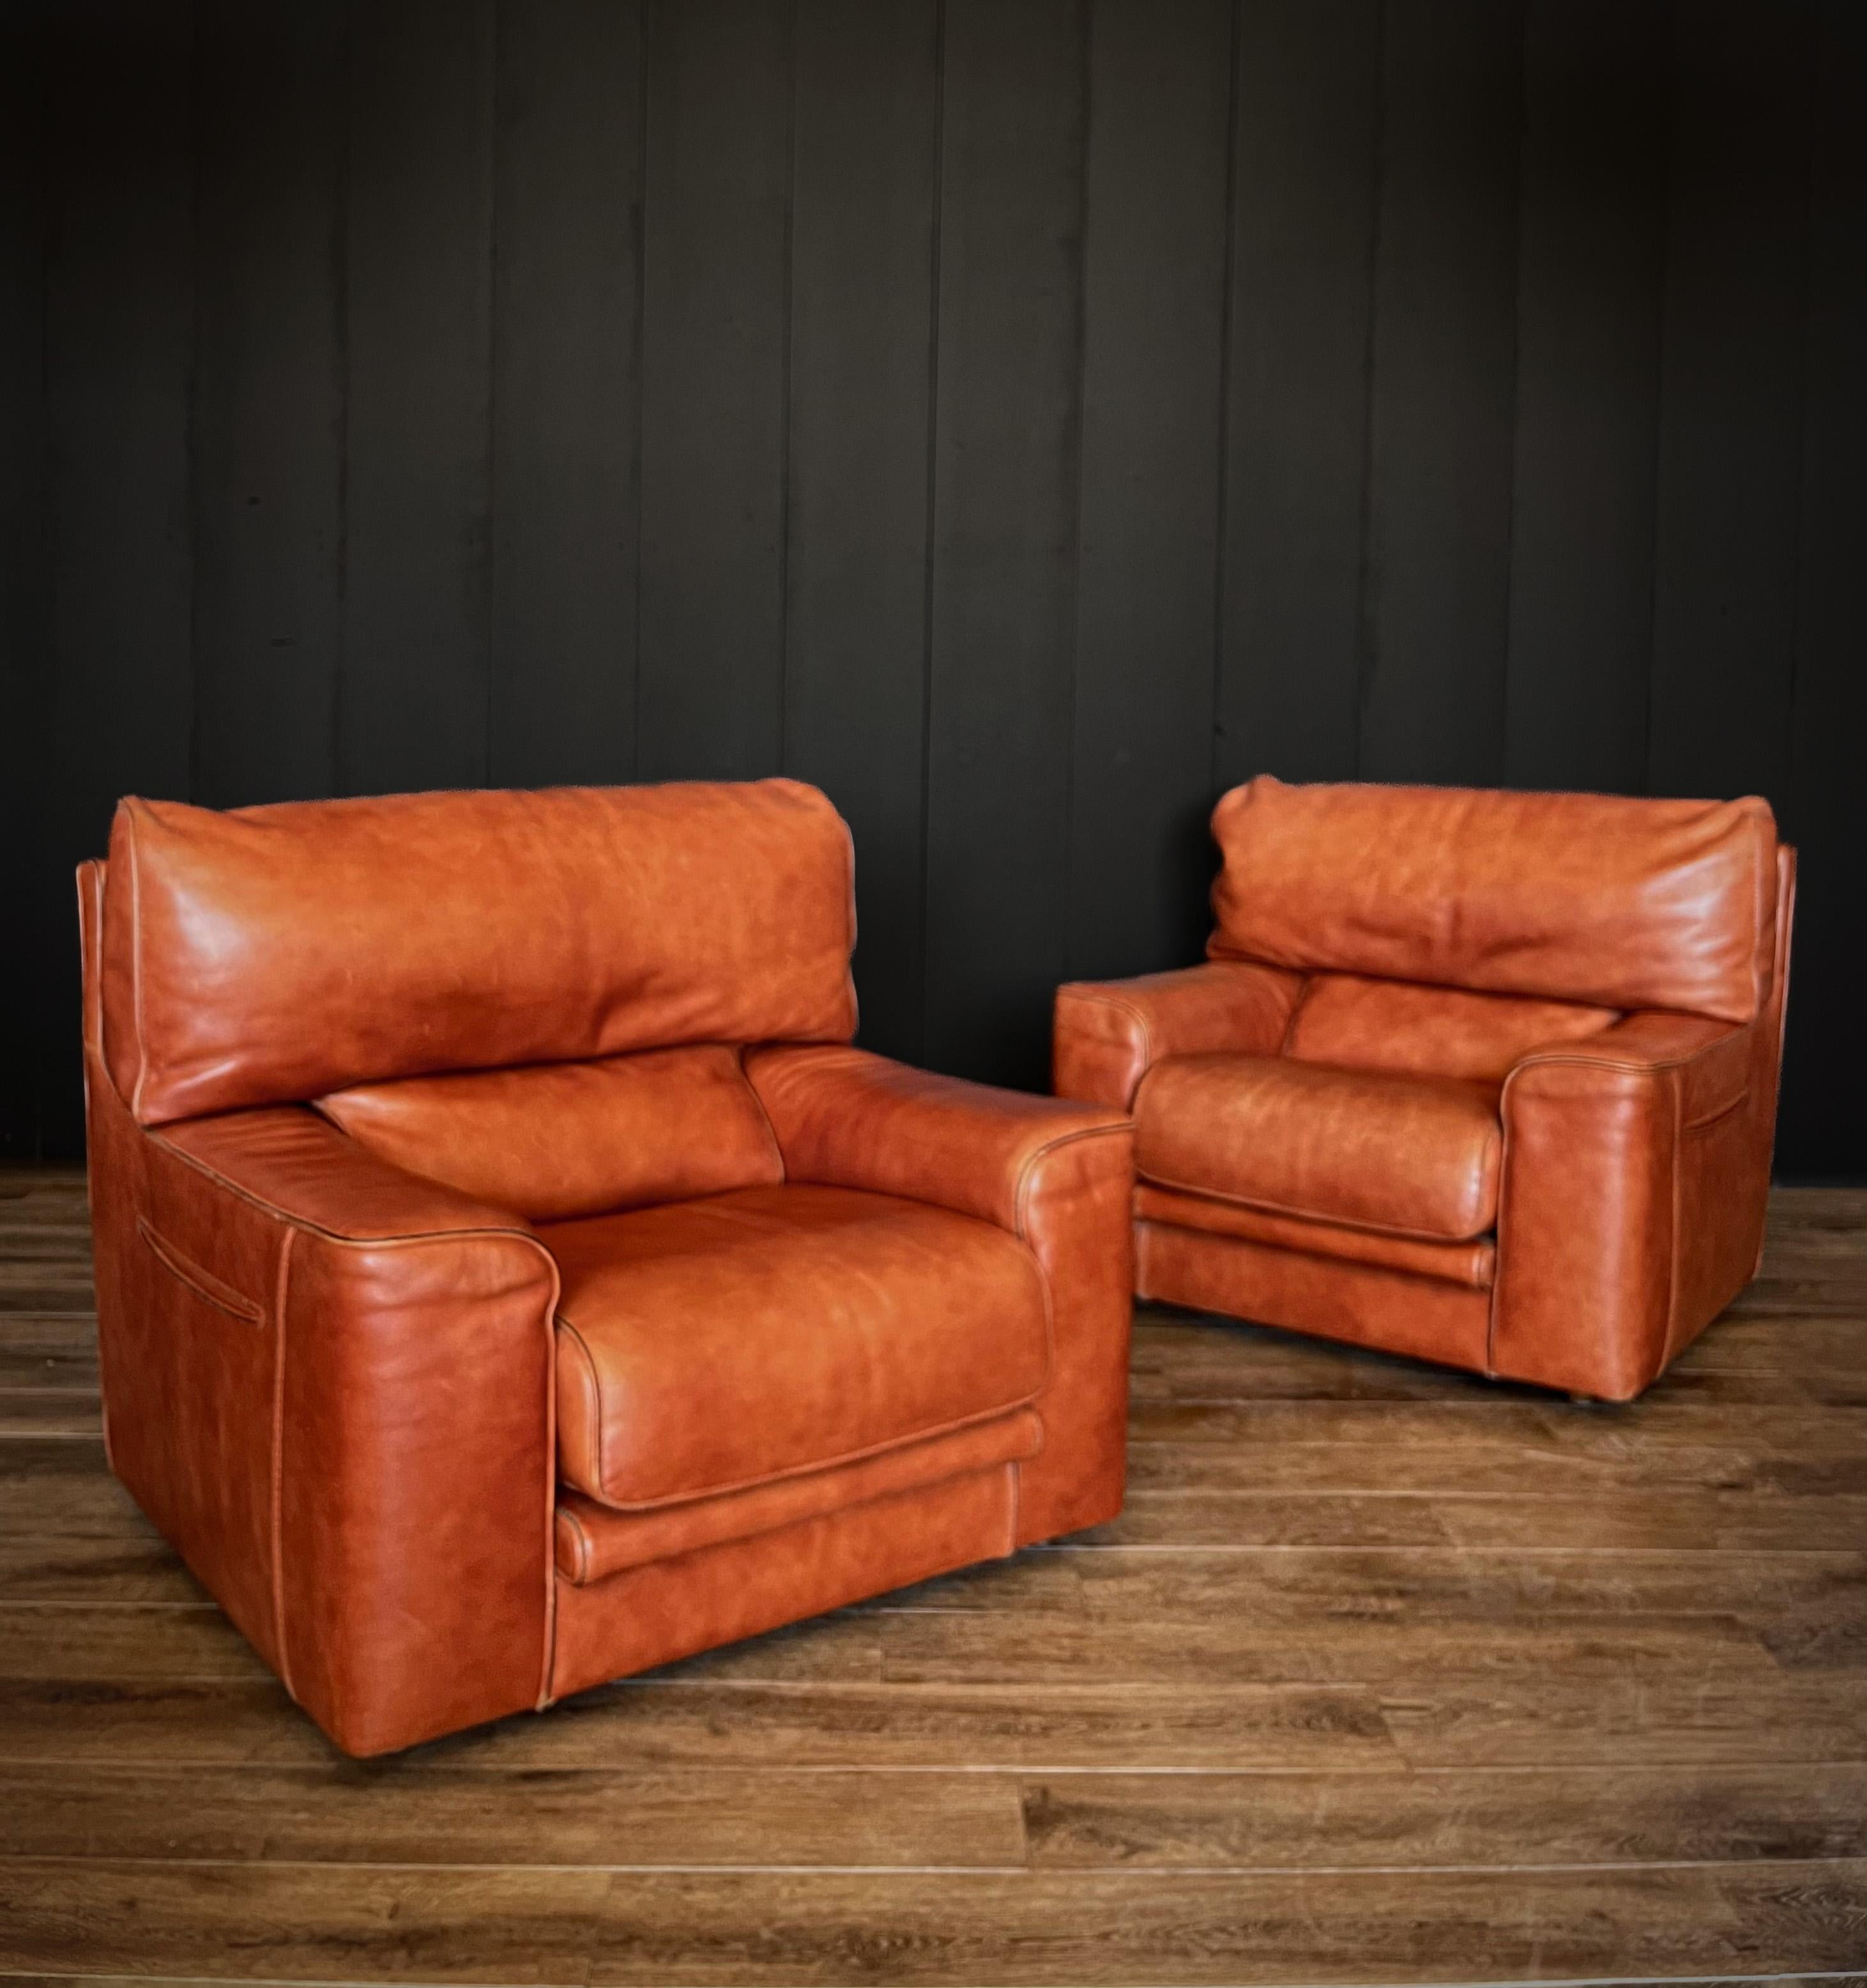 Experience vintage luxury with this pair of Roche Bobois Leather Lounge Chairs. These chairs, crafted with precision, offer timeless style and clever functionality. Adorned in premium leather, they radiate elegance and lasting comfort. What makes